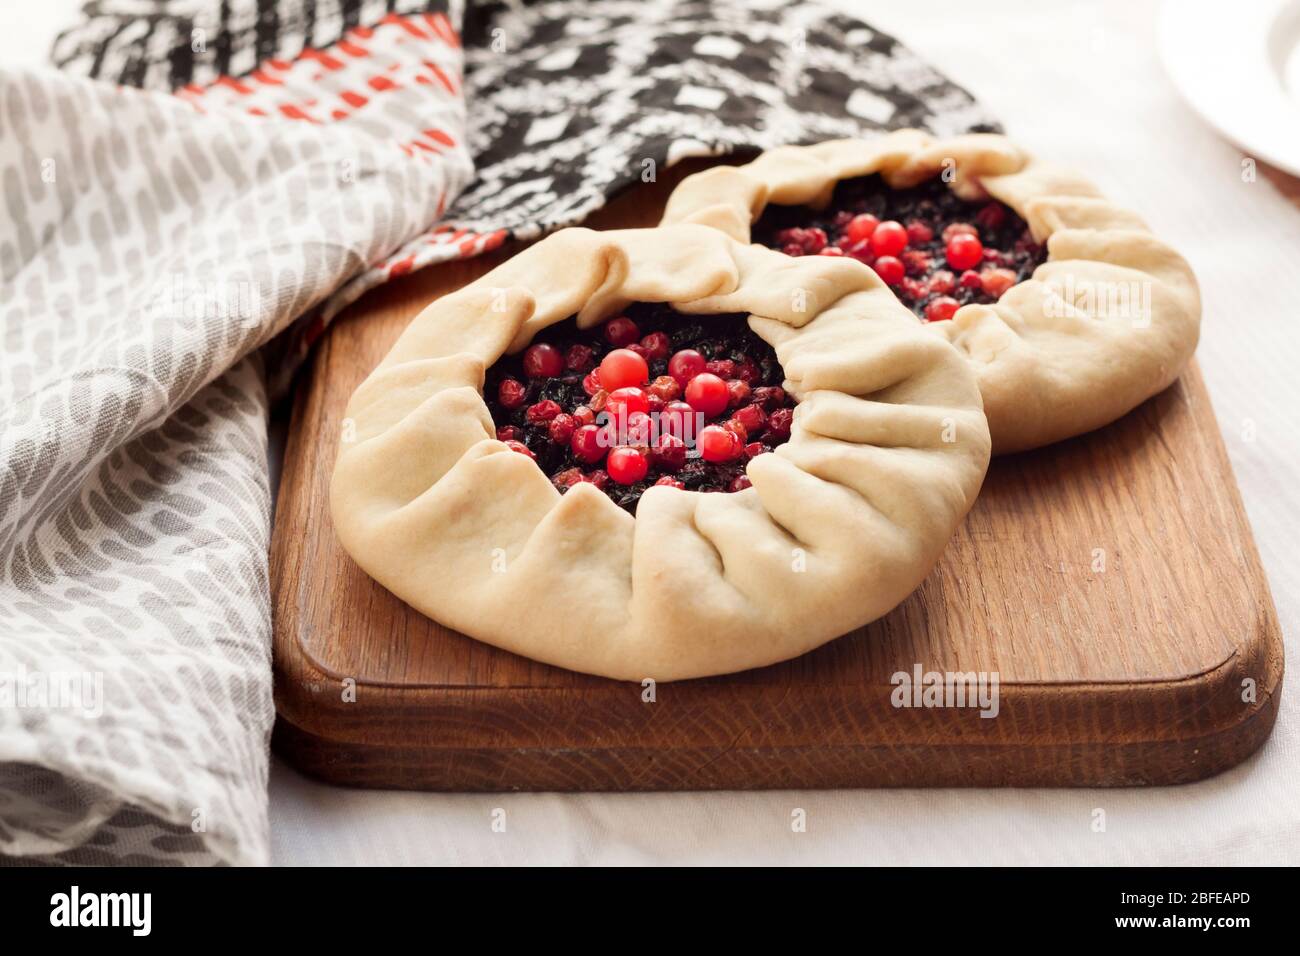 Homemade sweet galette with elderberries and cowberries on a wooden board Stock Photo